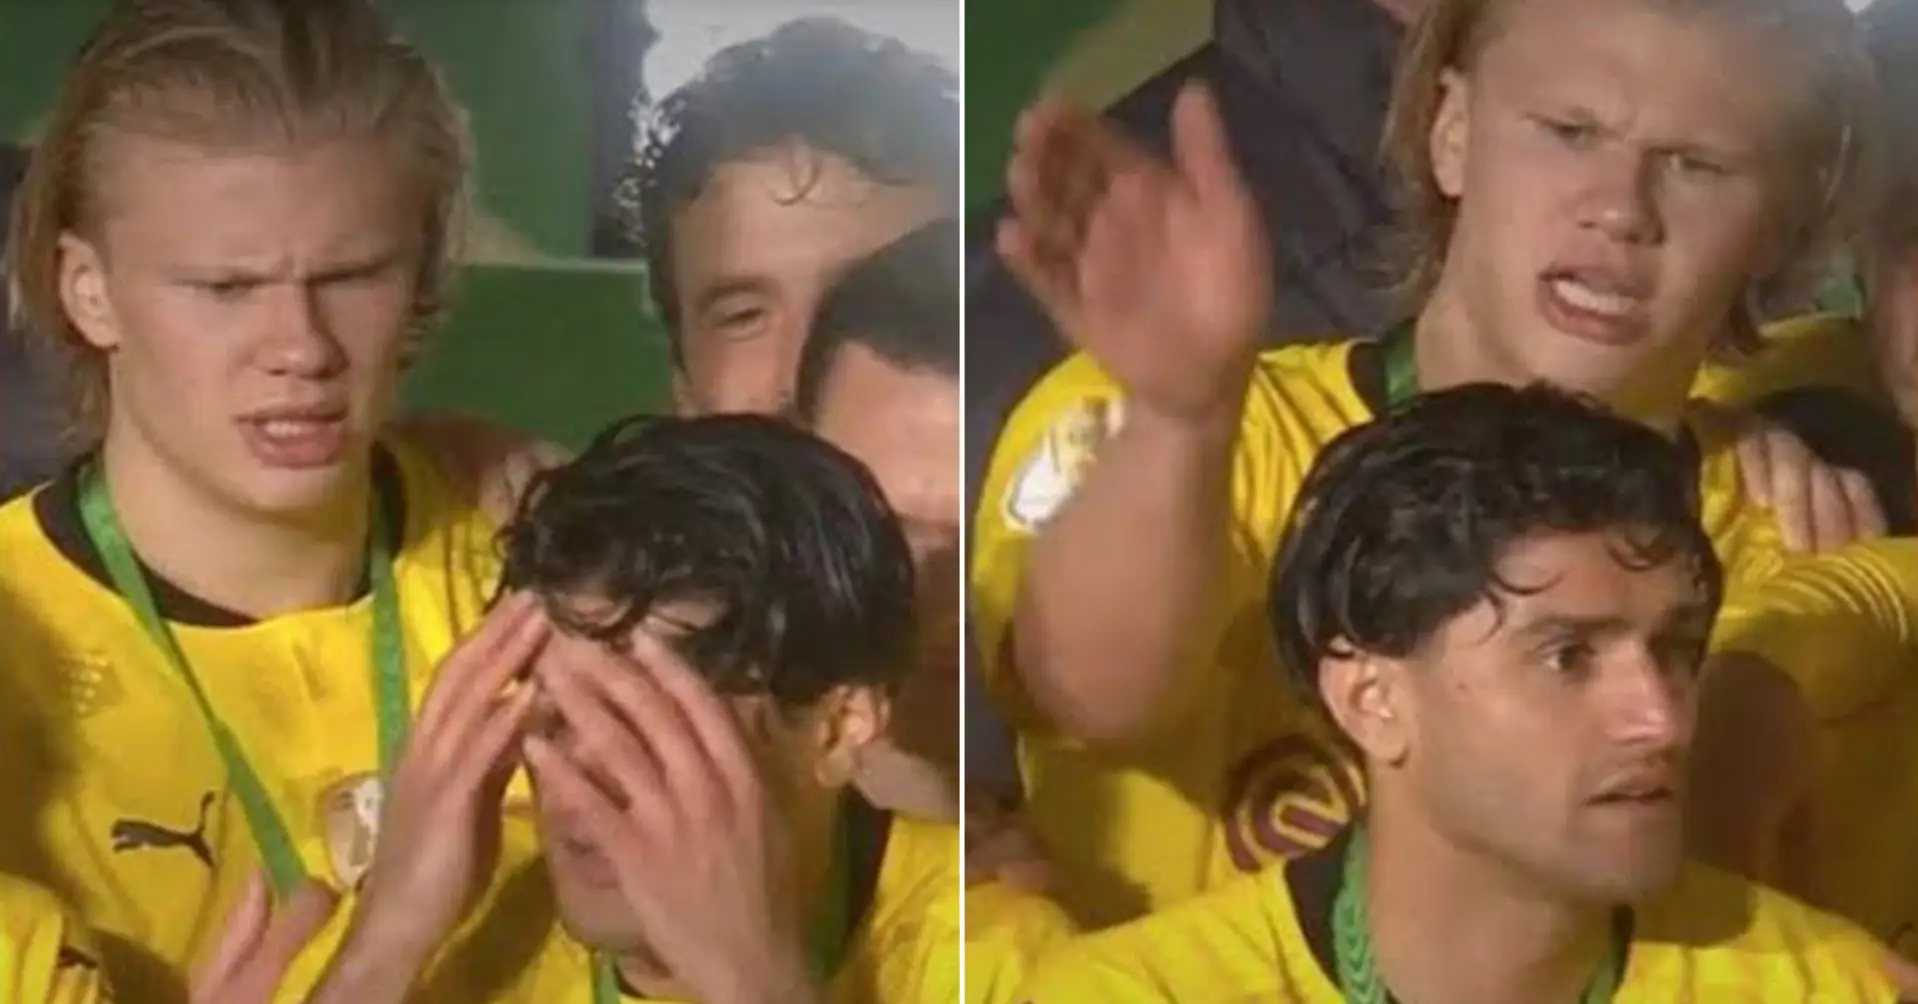 Erling Haaland slaps his teammate in front of cameras for ‘celebrating too early’